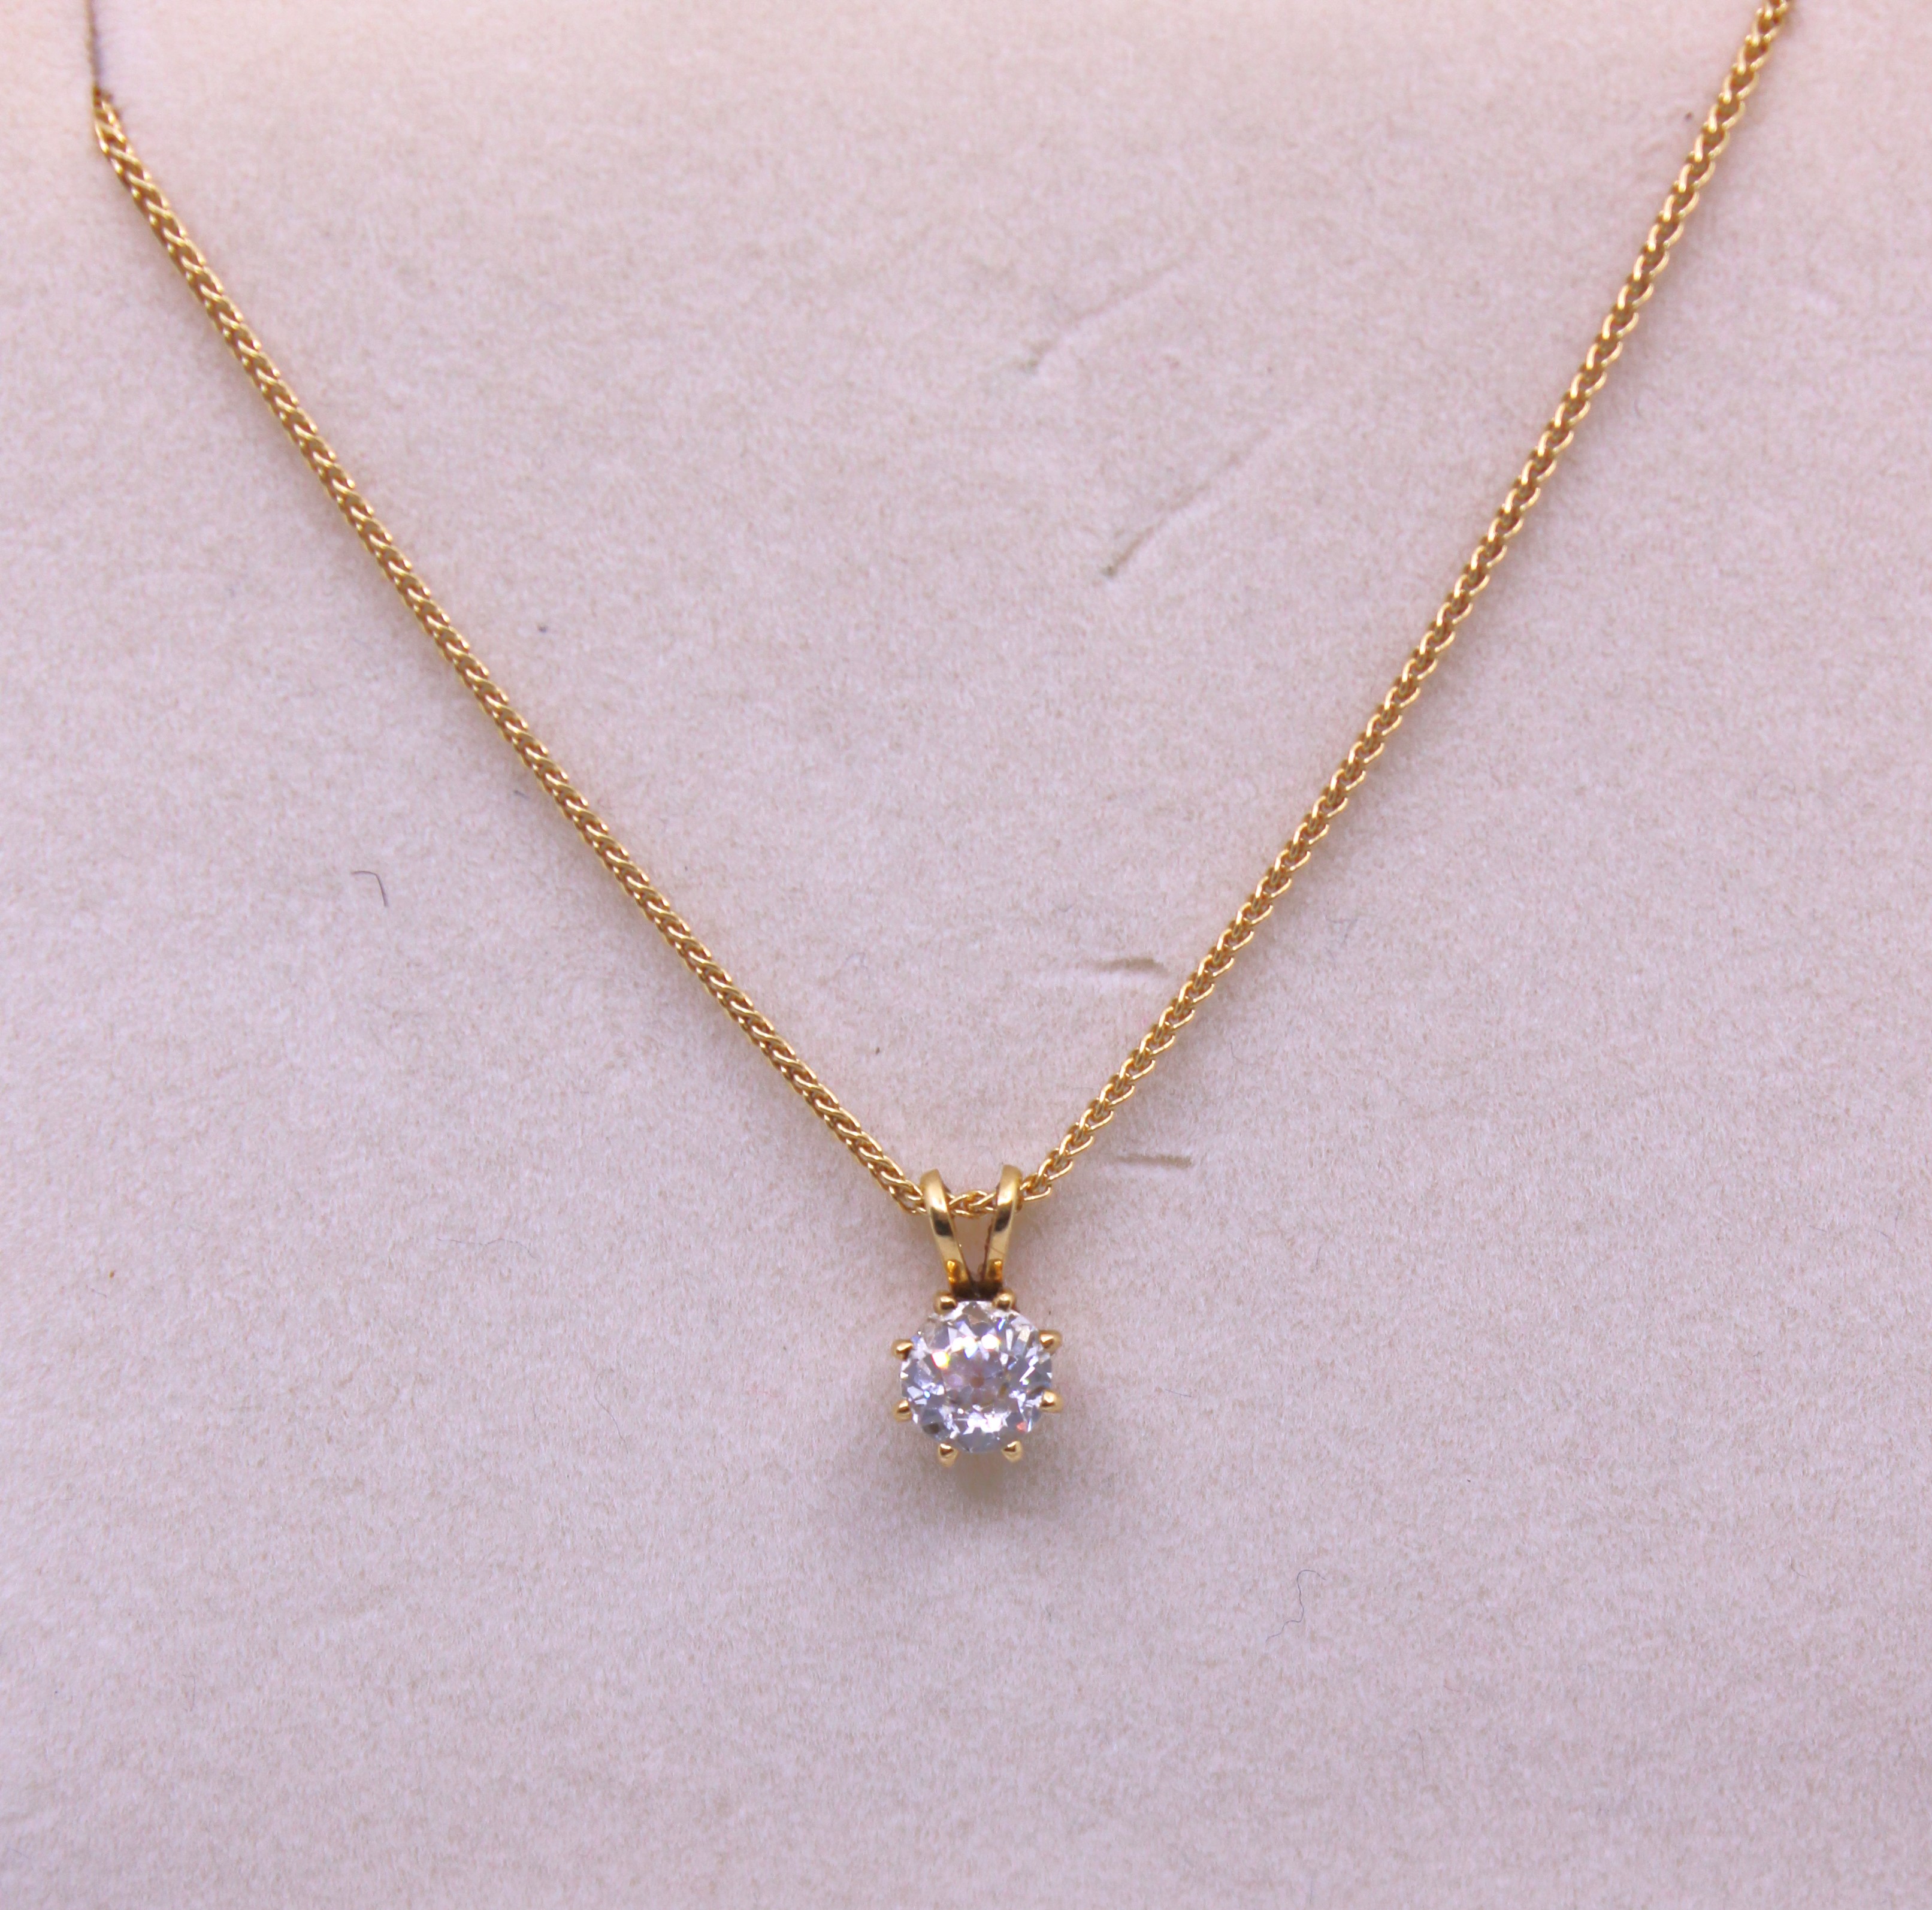 18ct Yellow Gold Approx. 0.55ct Solitaire Old European Cut Diamond Pendant on an 18ct Yellow Gold